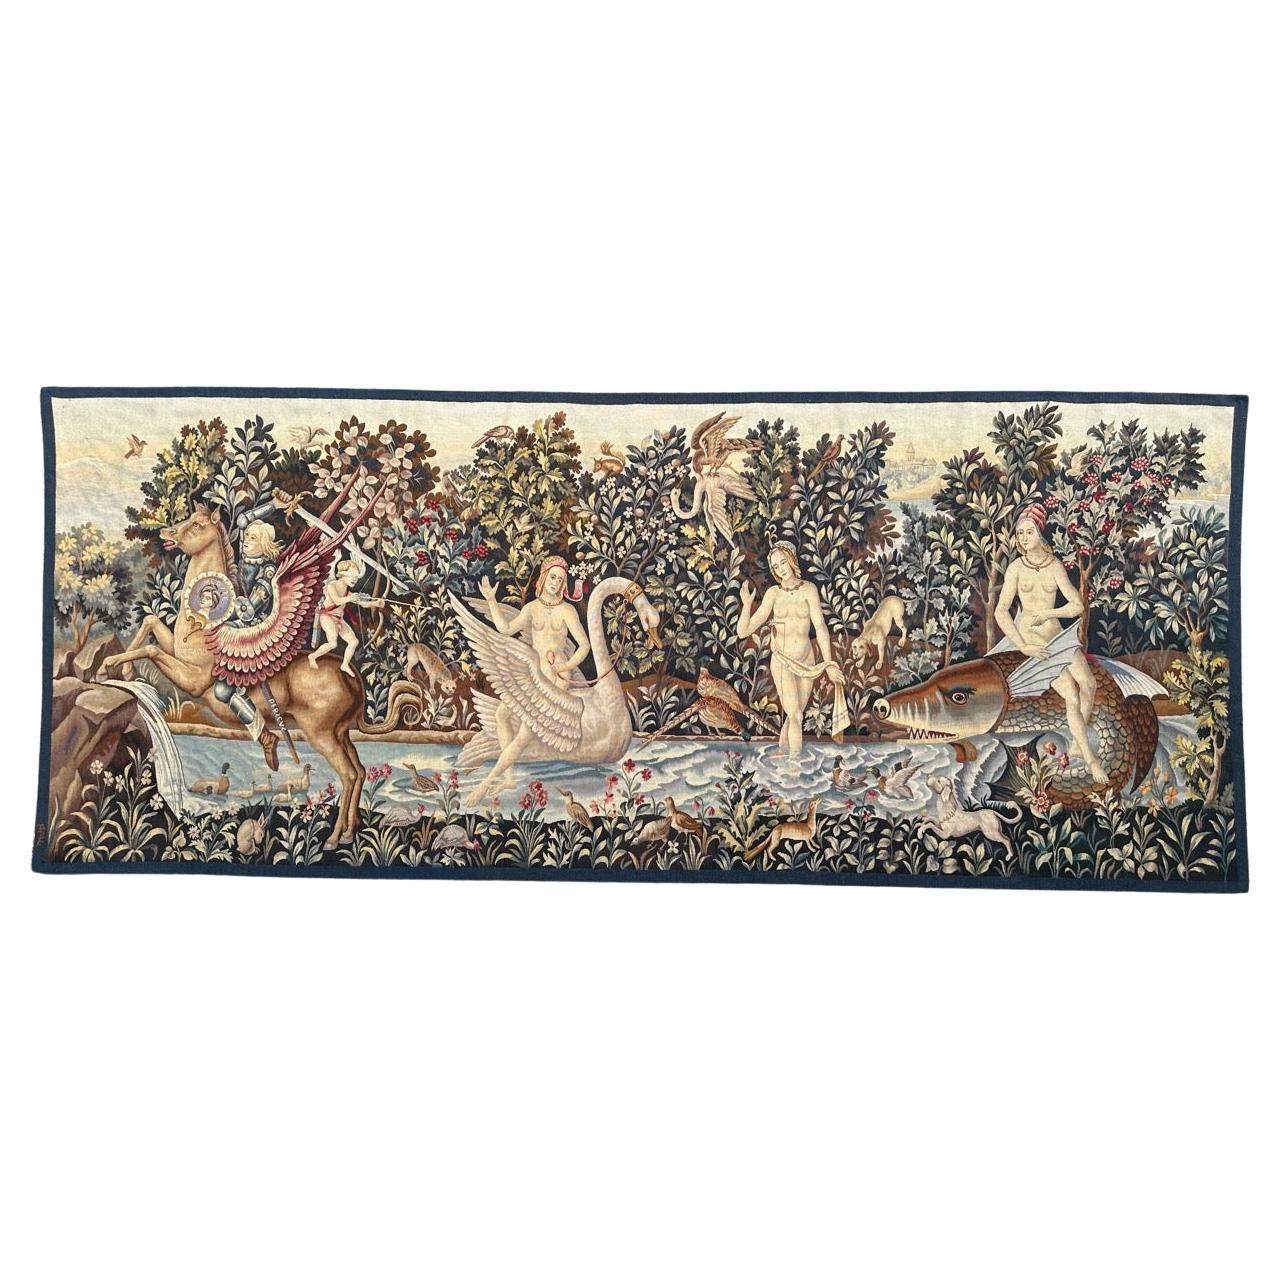 Bobyrug's Nice French Aubusson Tapestry " Perseus " (Tapisserie française d'Aubusson)